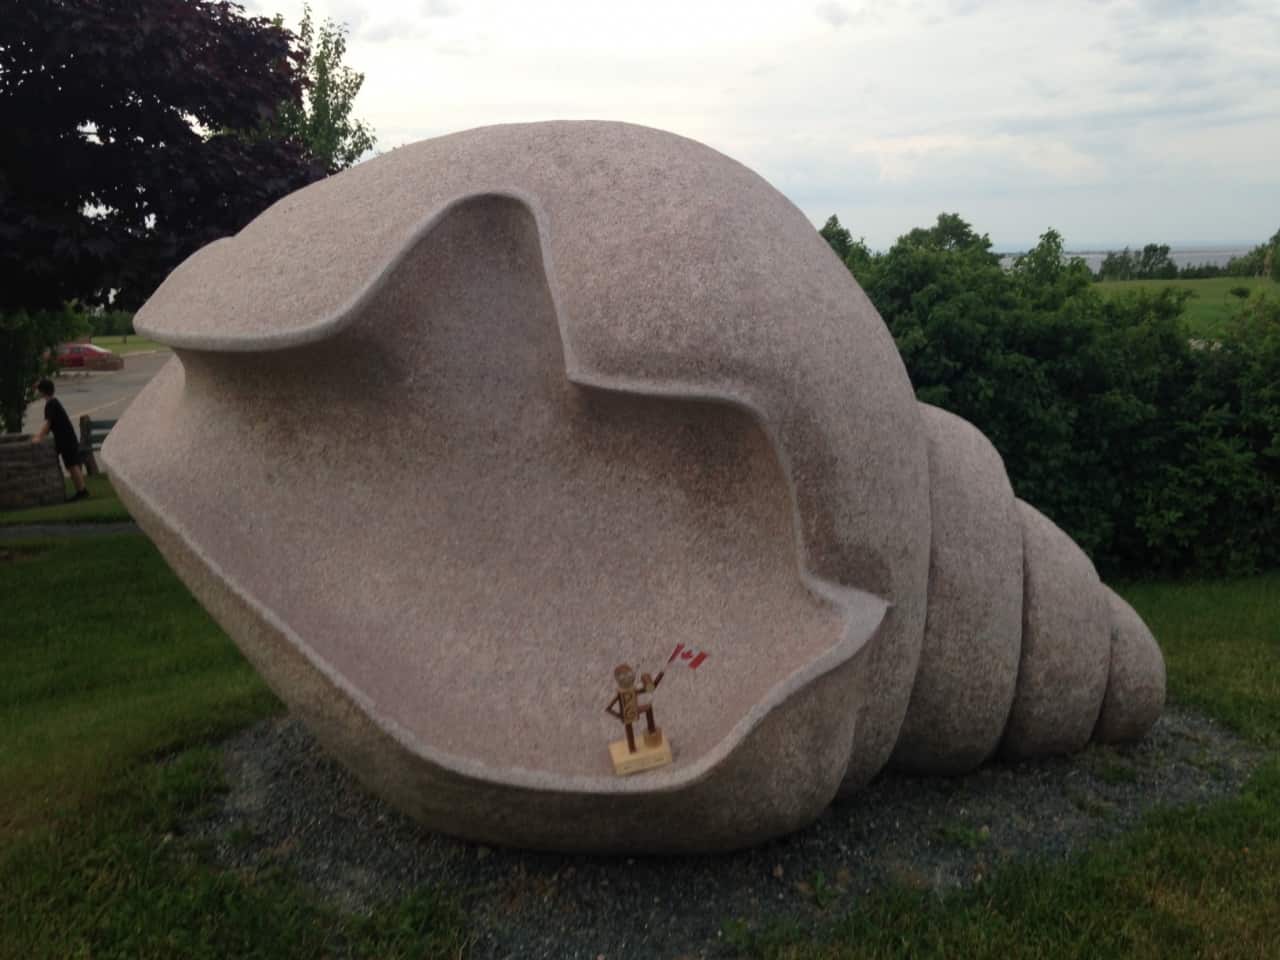 918bae40ece404d0368f374b.jpg - Caraquet, NB - Across Canada in search of #BIGselfies trip 2014<br />#BIGselfies with the worlds longest conch shell, couldn't hear the sea in it though